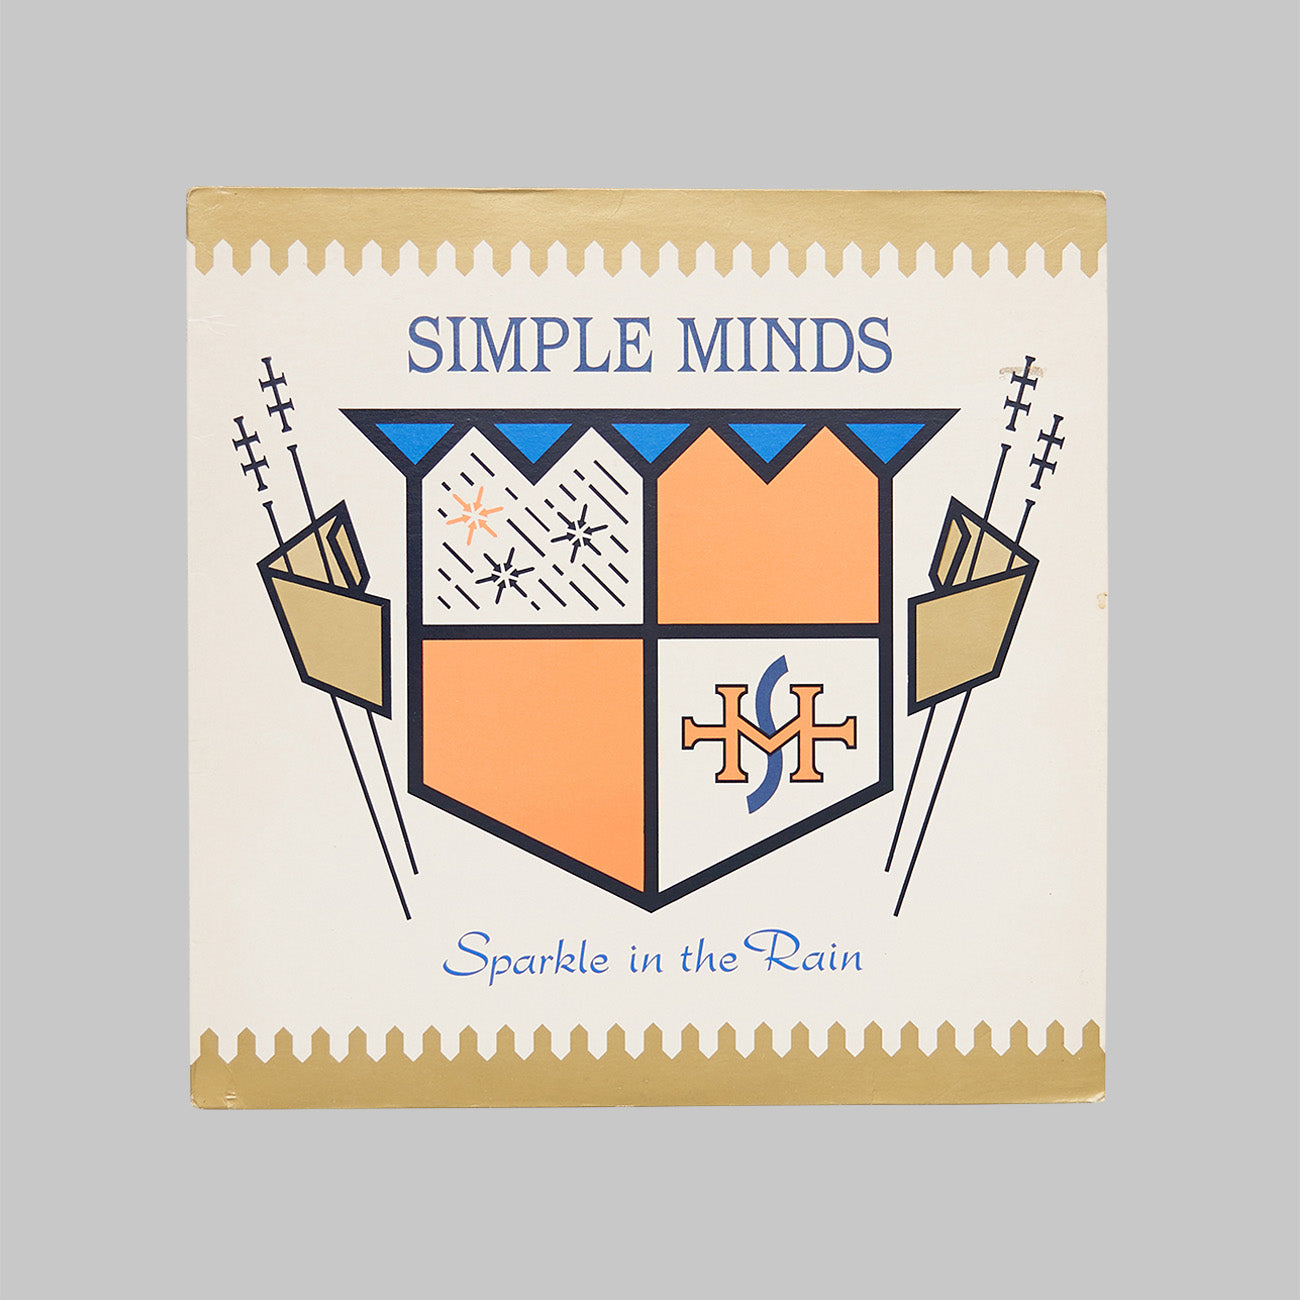 SIMPLE MINDS / SPARKLE IN THE RAIN